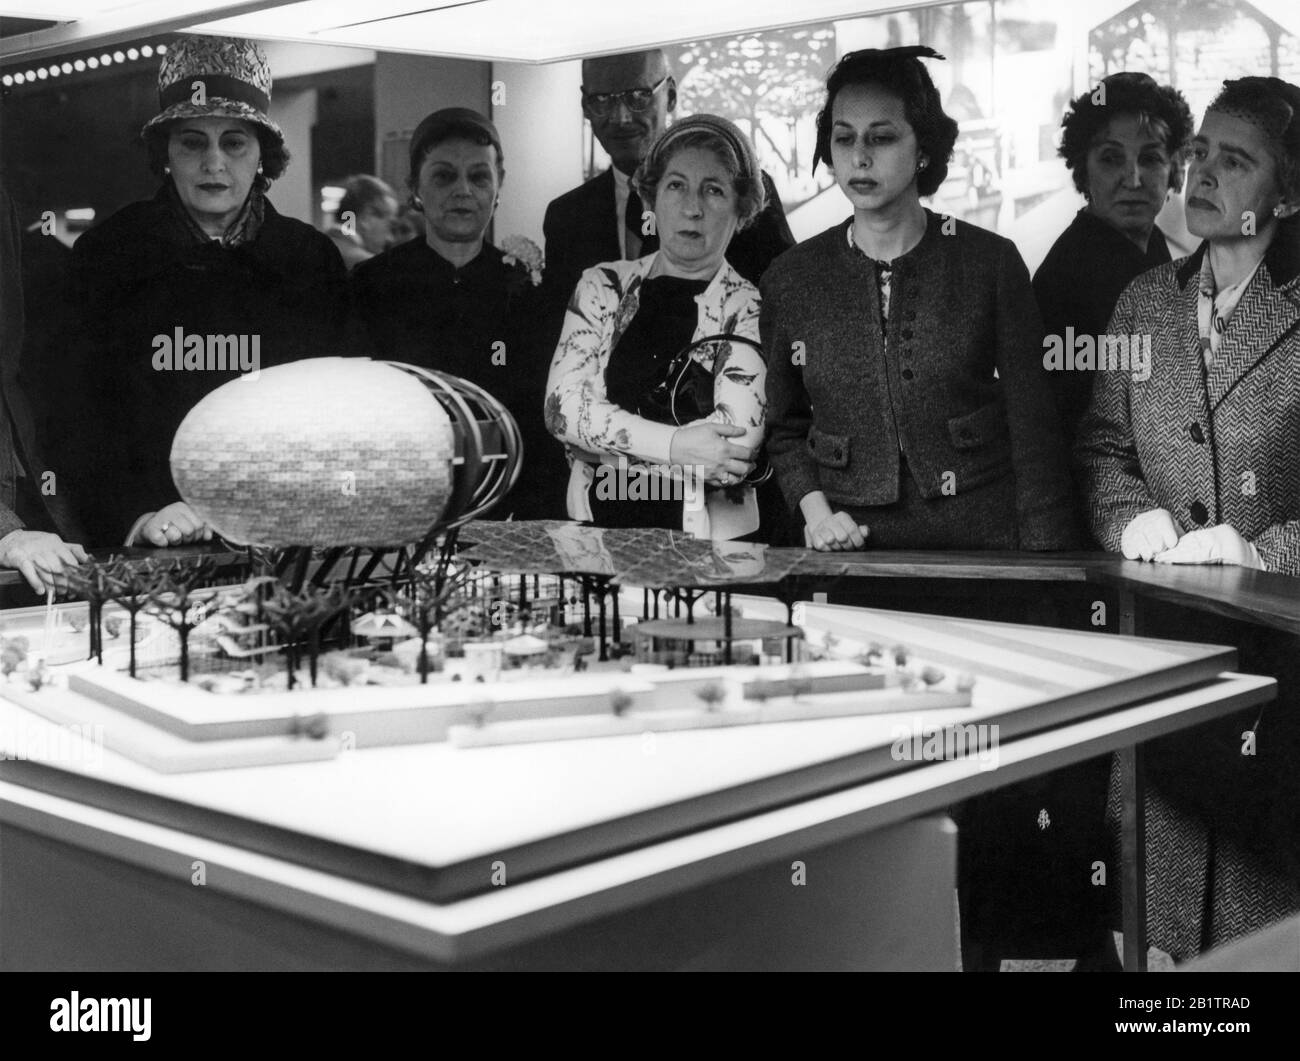 Women gathered around an architectural design model of the IBM pavilion with man-made steel trees and Ovoid Theater, designed by Charles Eames and Eero Saarinen for the 1964 New York World's Fair. The pavilion model was on display at the IBM Business Show in Manhattan at the New York Coliseum, coinciding with the April 30, 1963 IBM Stockholder's Annual Meeting. Stock Photo